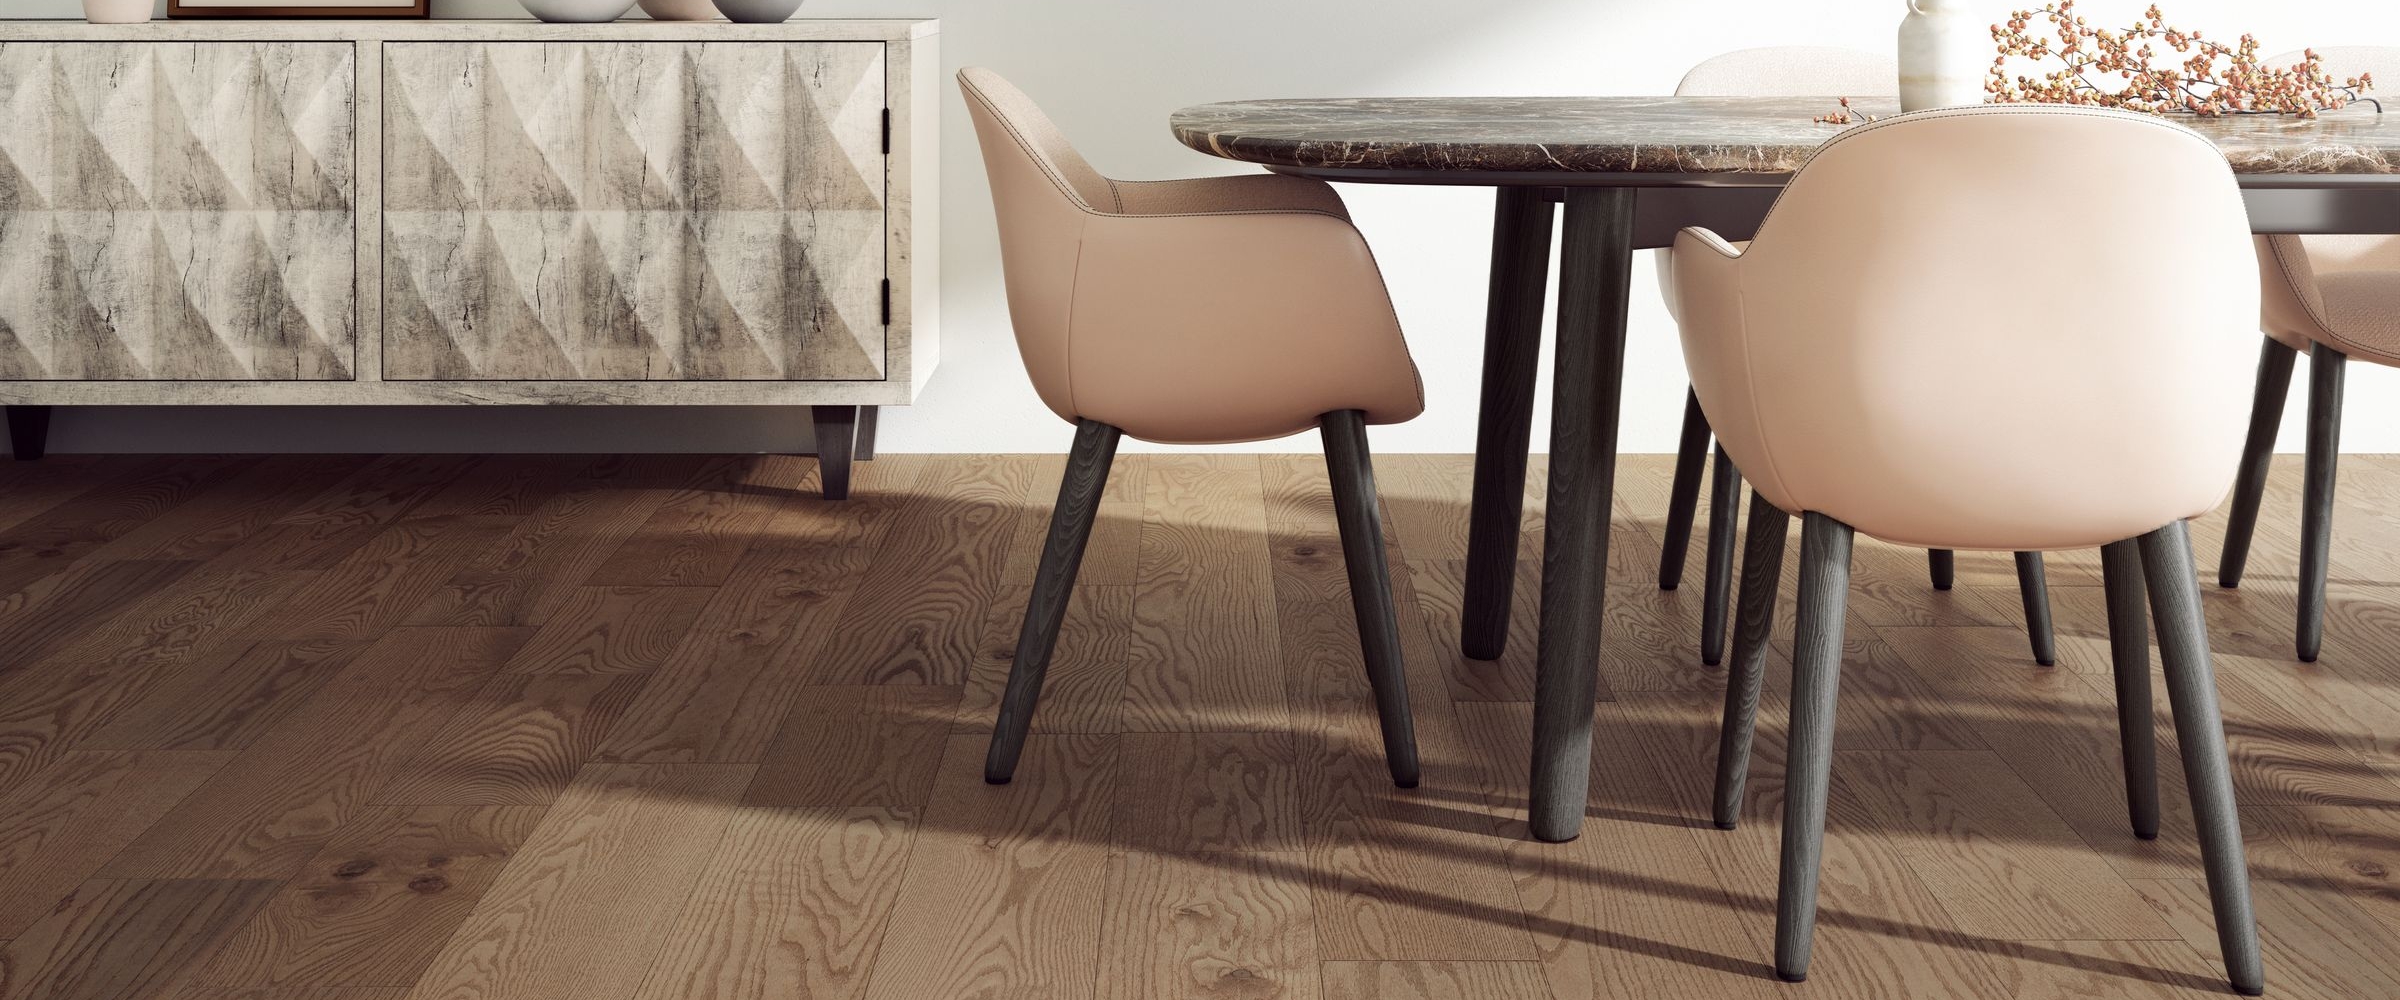 Mercier Wood Flooring innovates again with its brand-new Atmosphere Collection